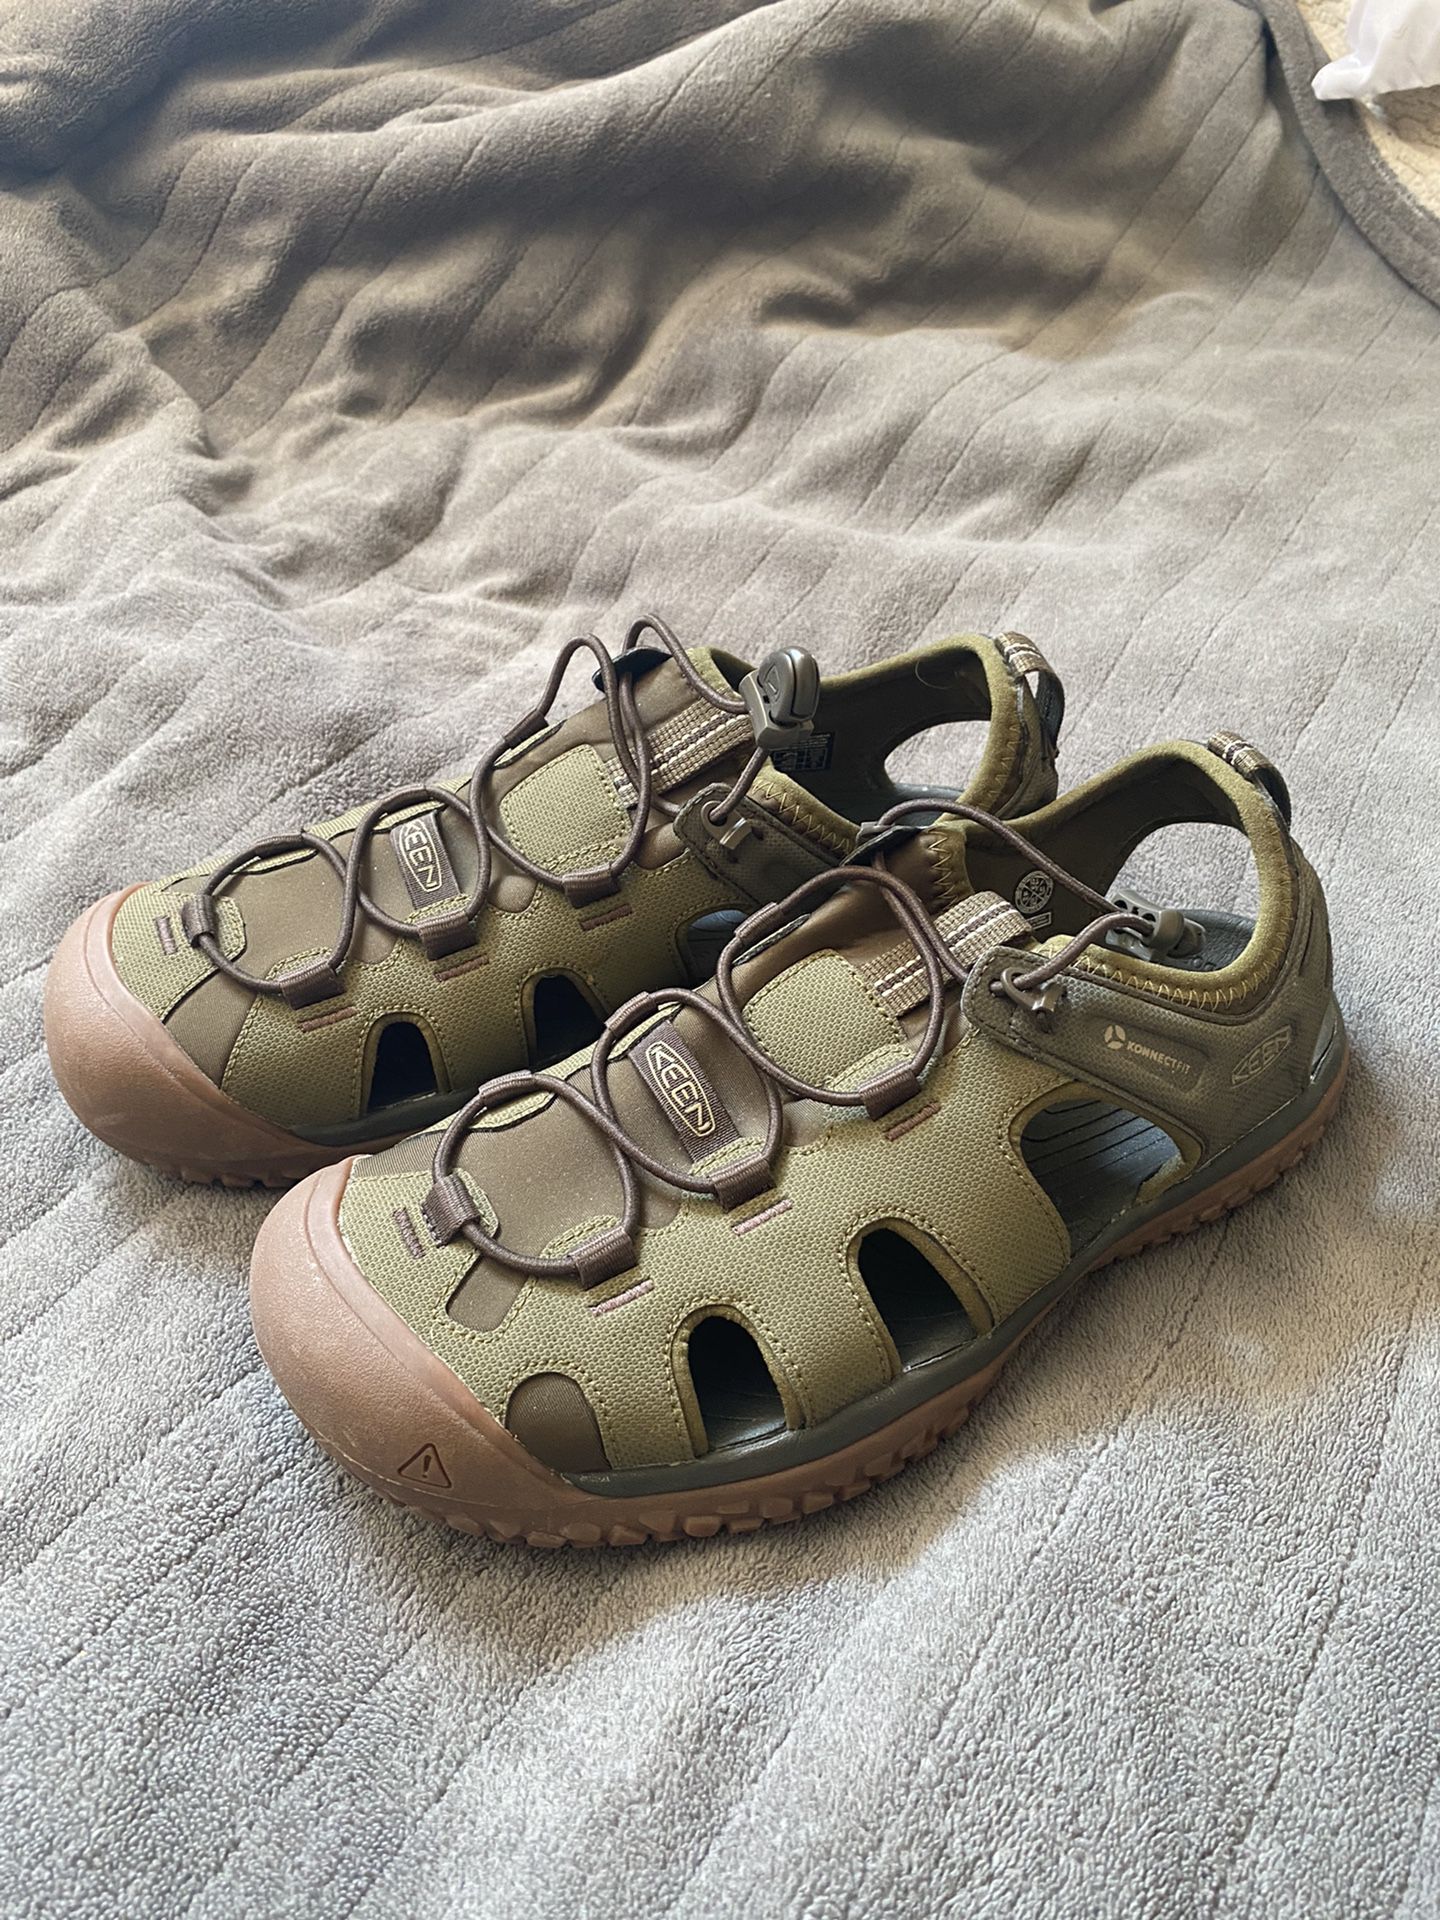 10 1/2 Keen Shoes Brand New